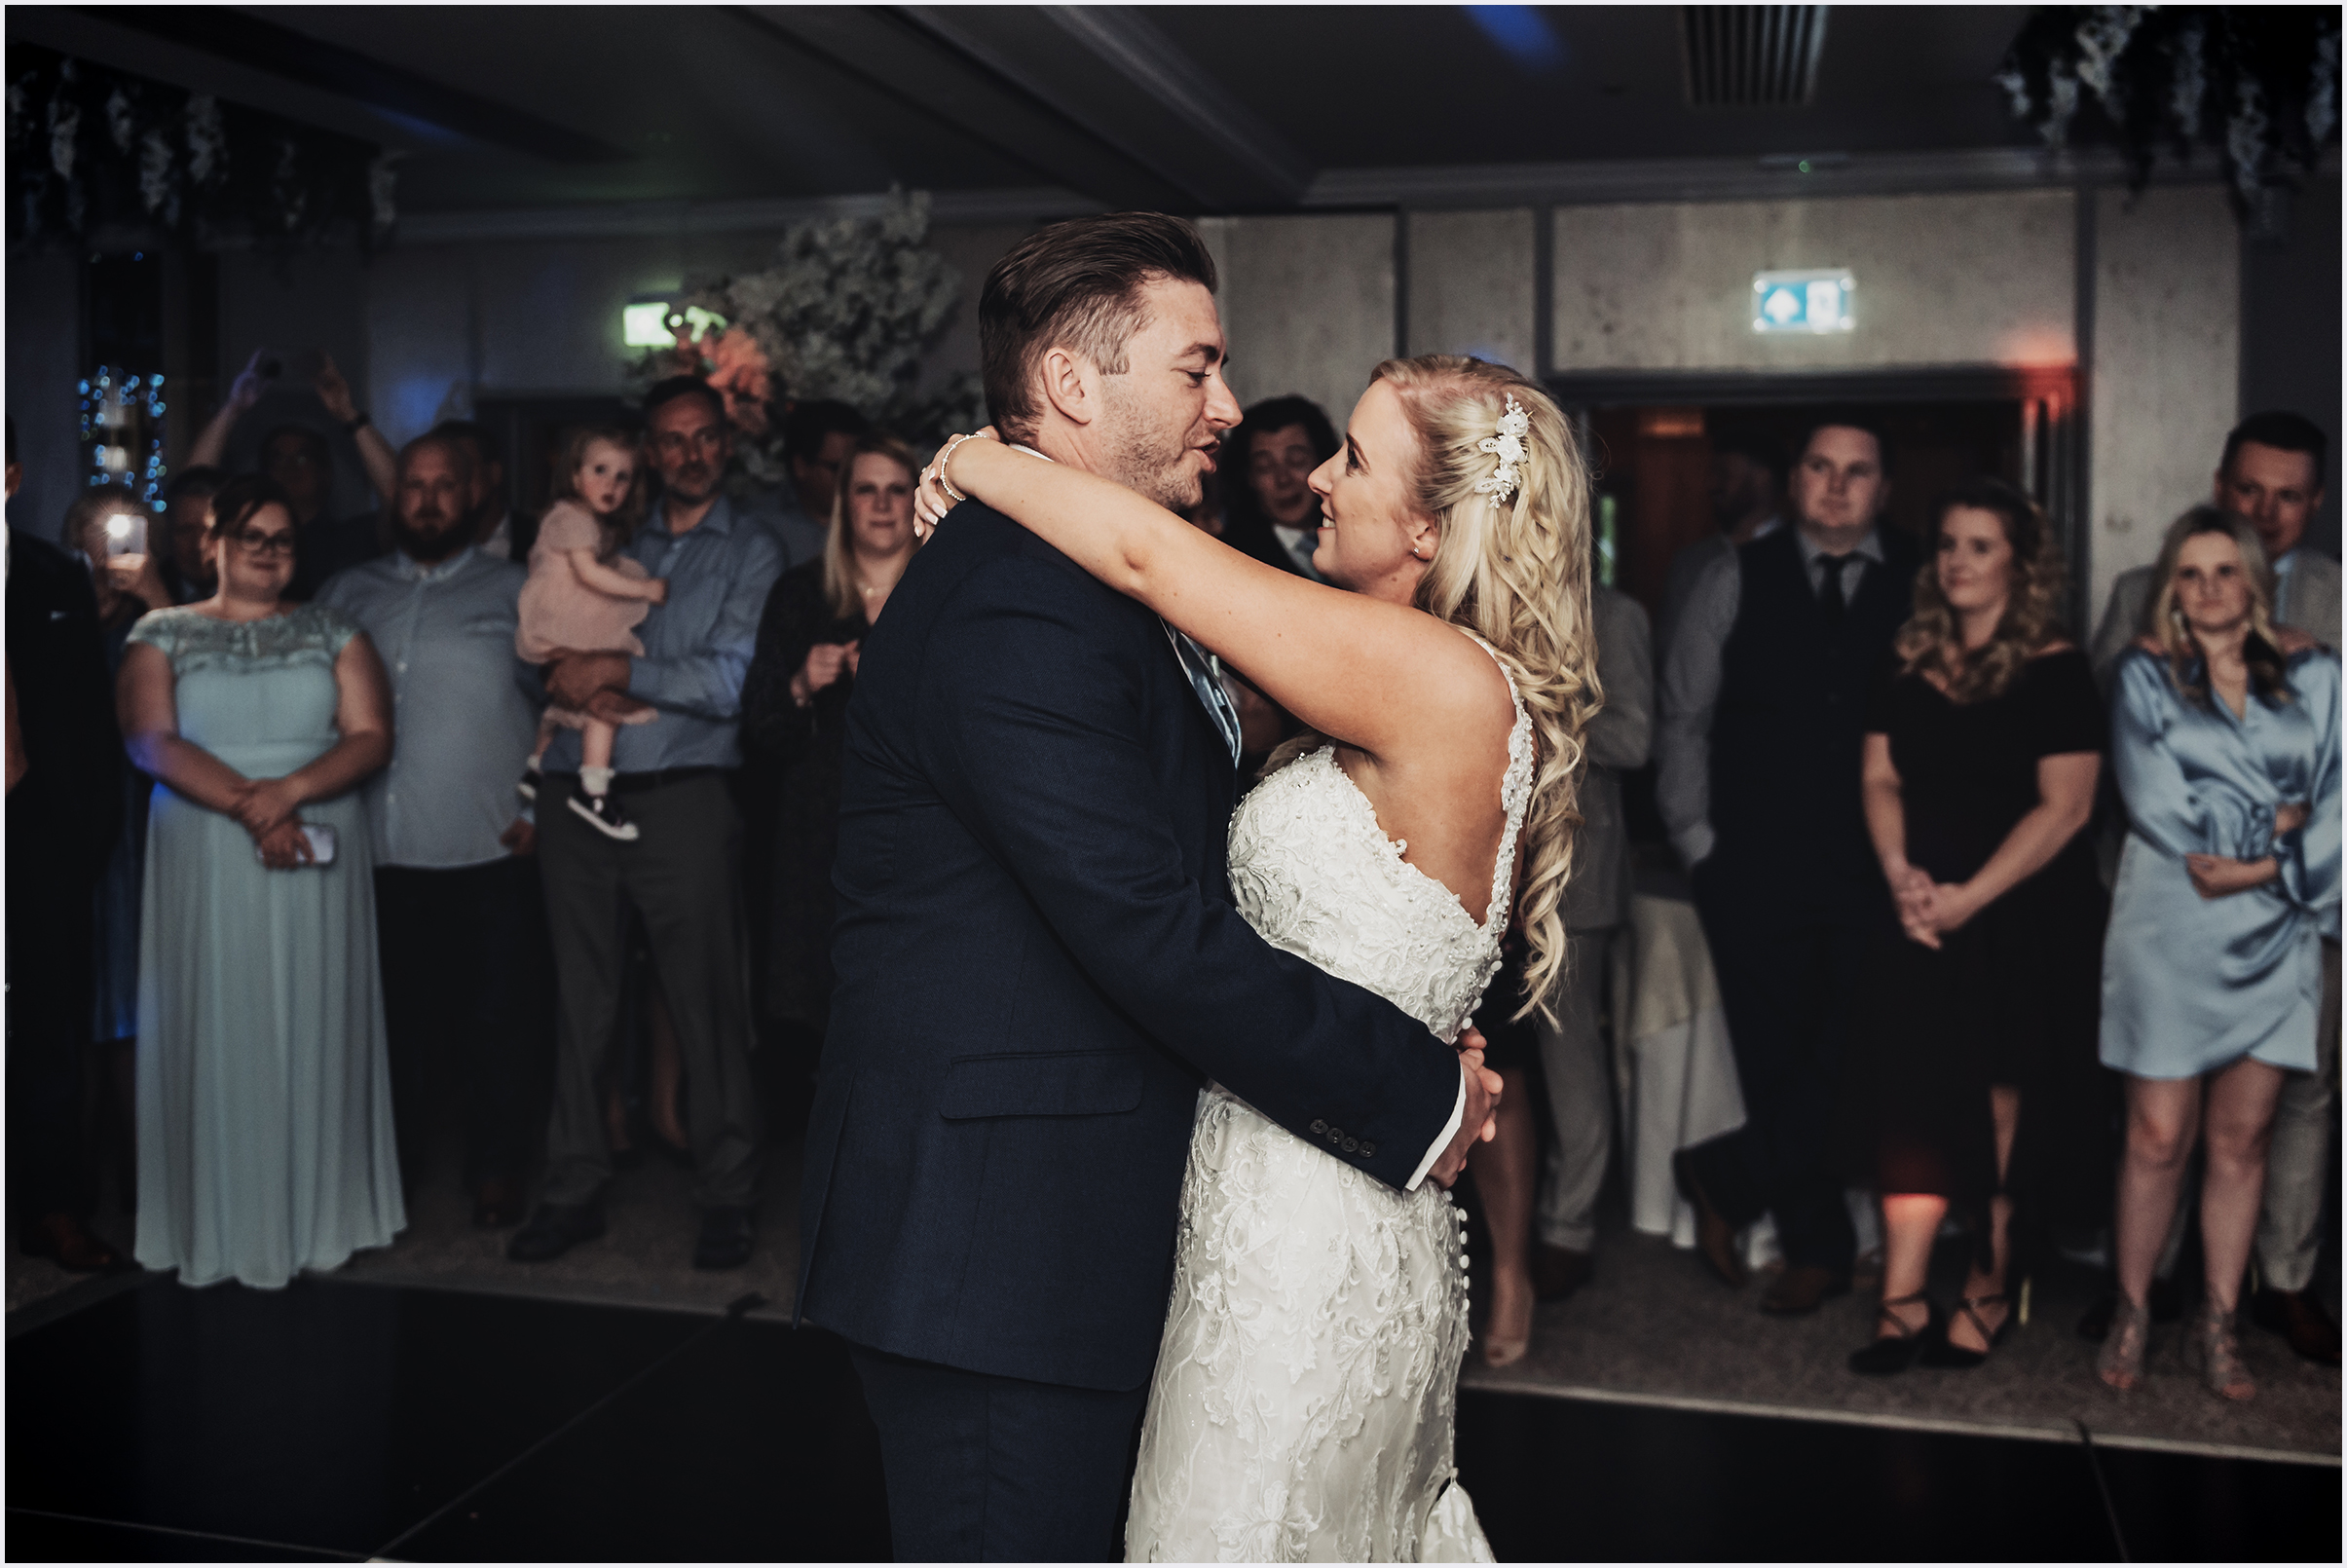 A bride drapes her arms around her new husband's shoulders as he has his arms around her waist as guests watch them dance their first dance at The Grosvenor Pulford Hotel and Spa.